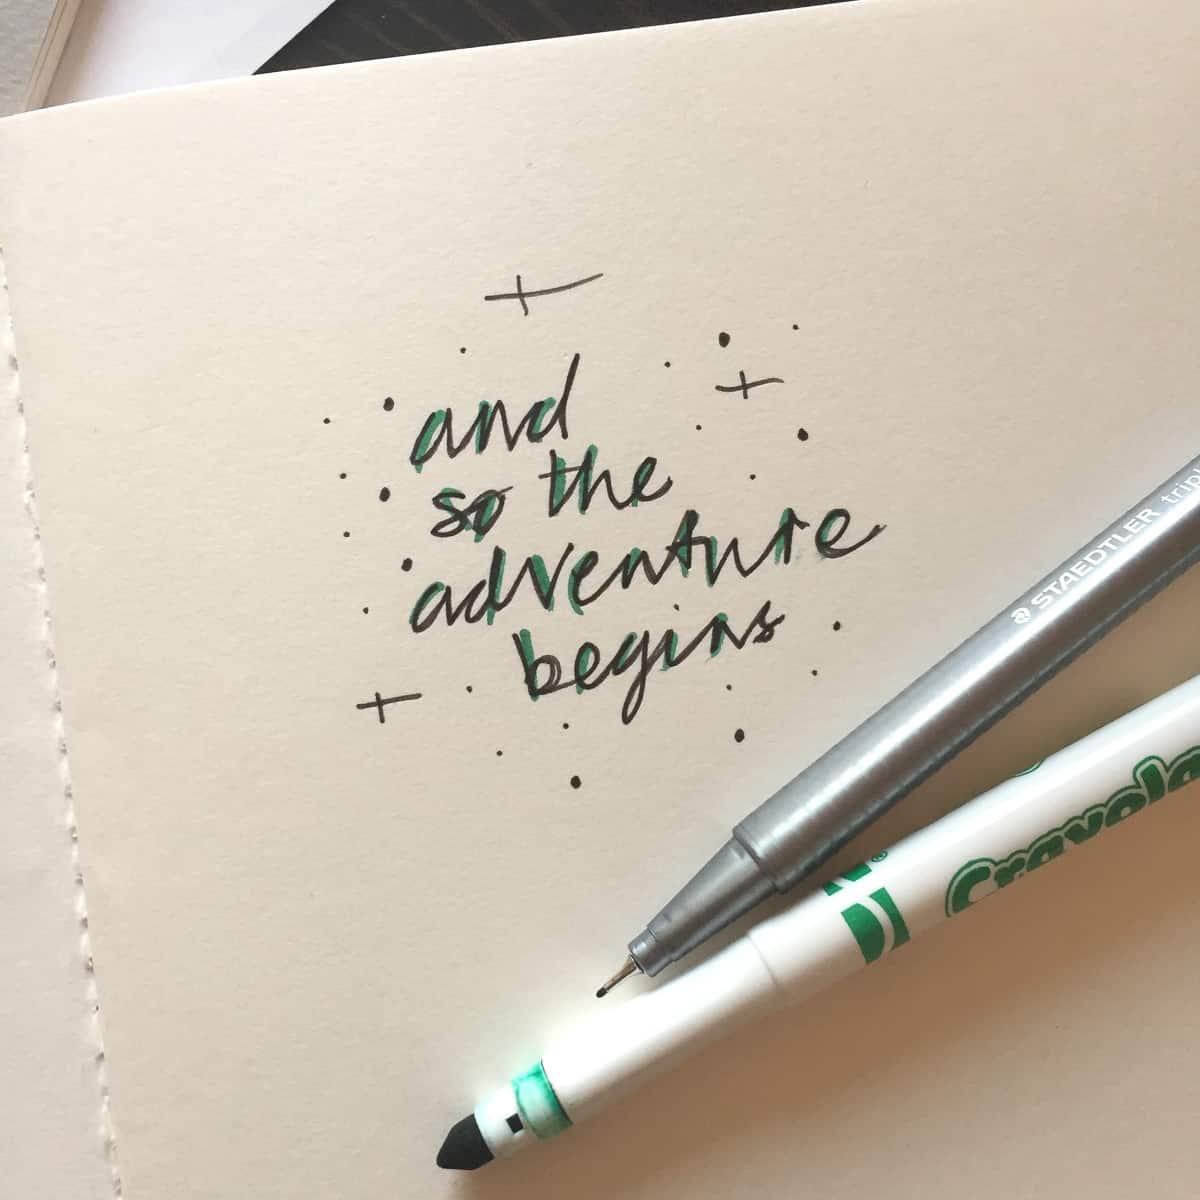 "and so the adventure begins" text